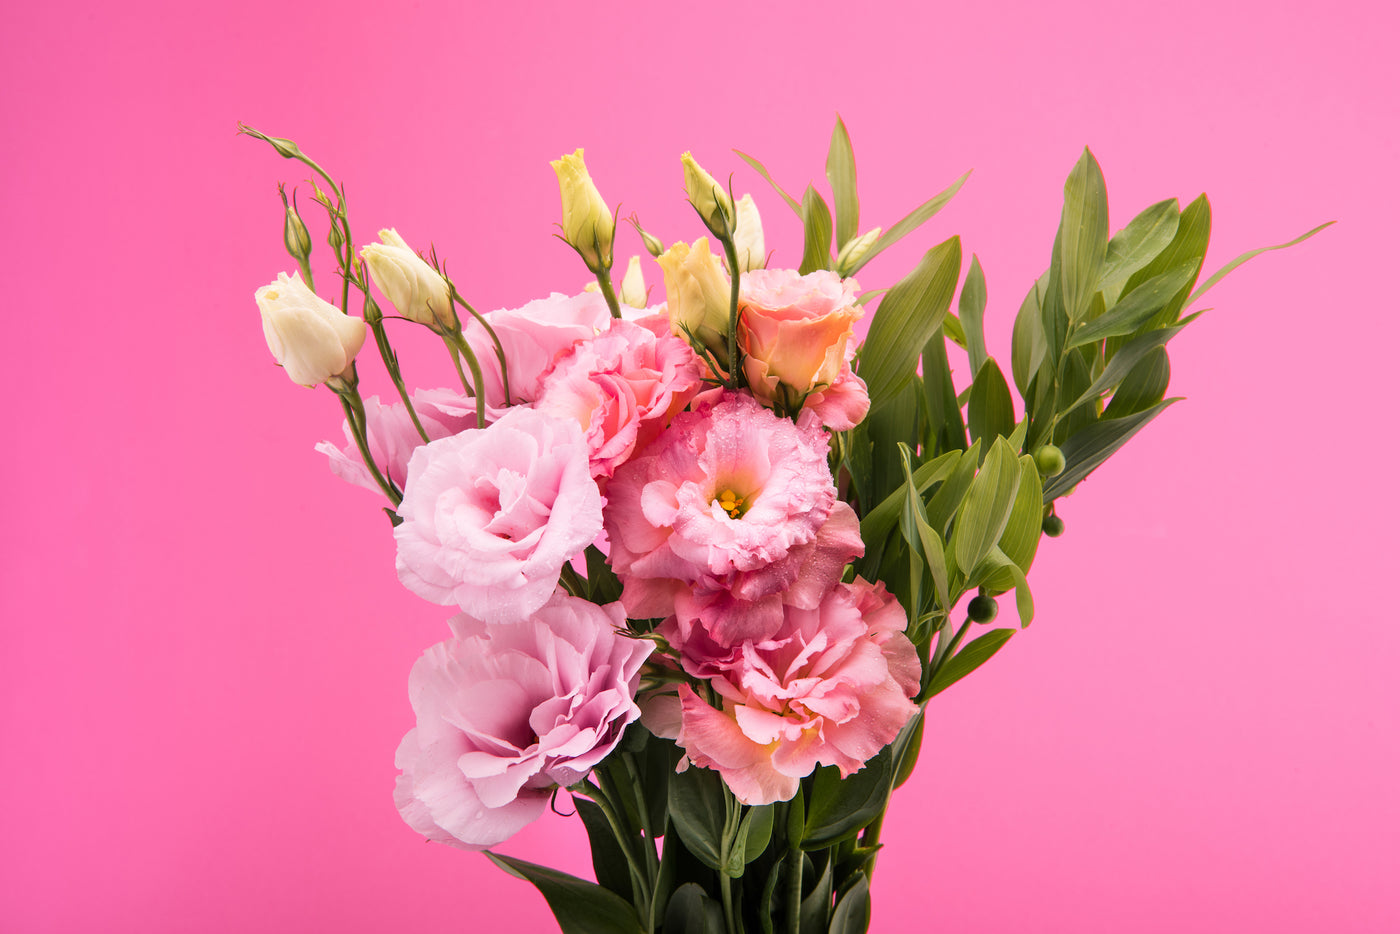 Pink Flowers: Learn How To Style Your Event by Knowing the 5 Most Underrated Pink Flowers